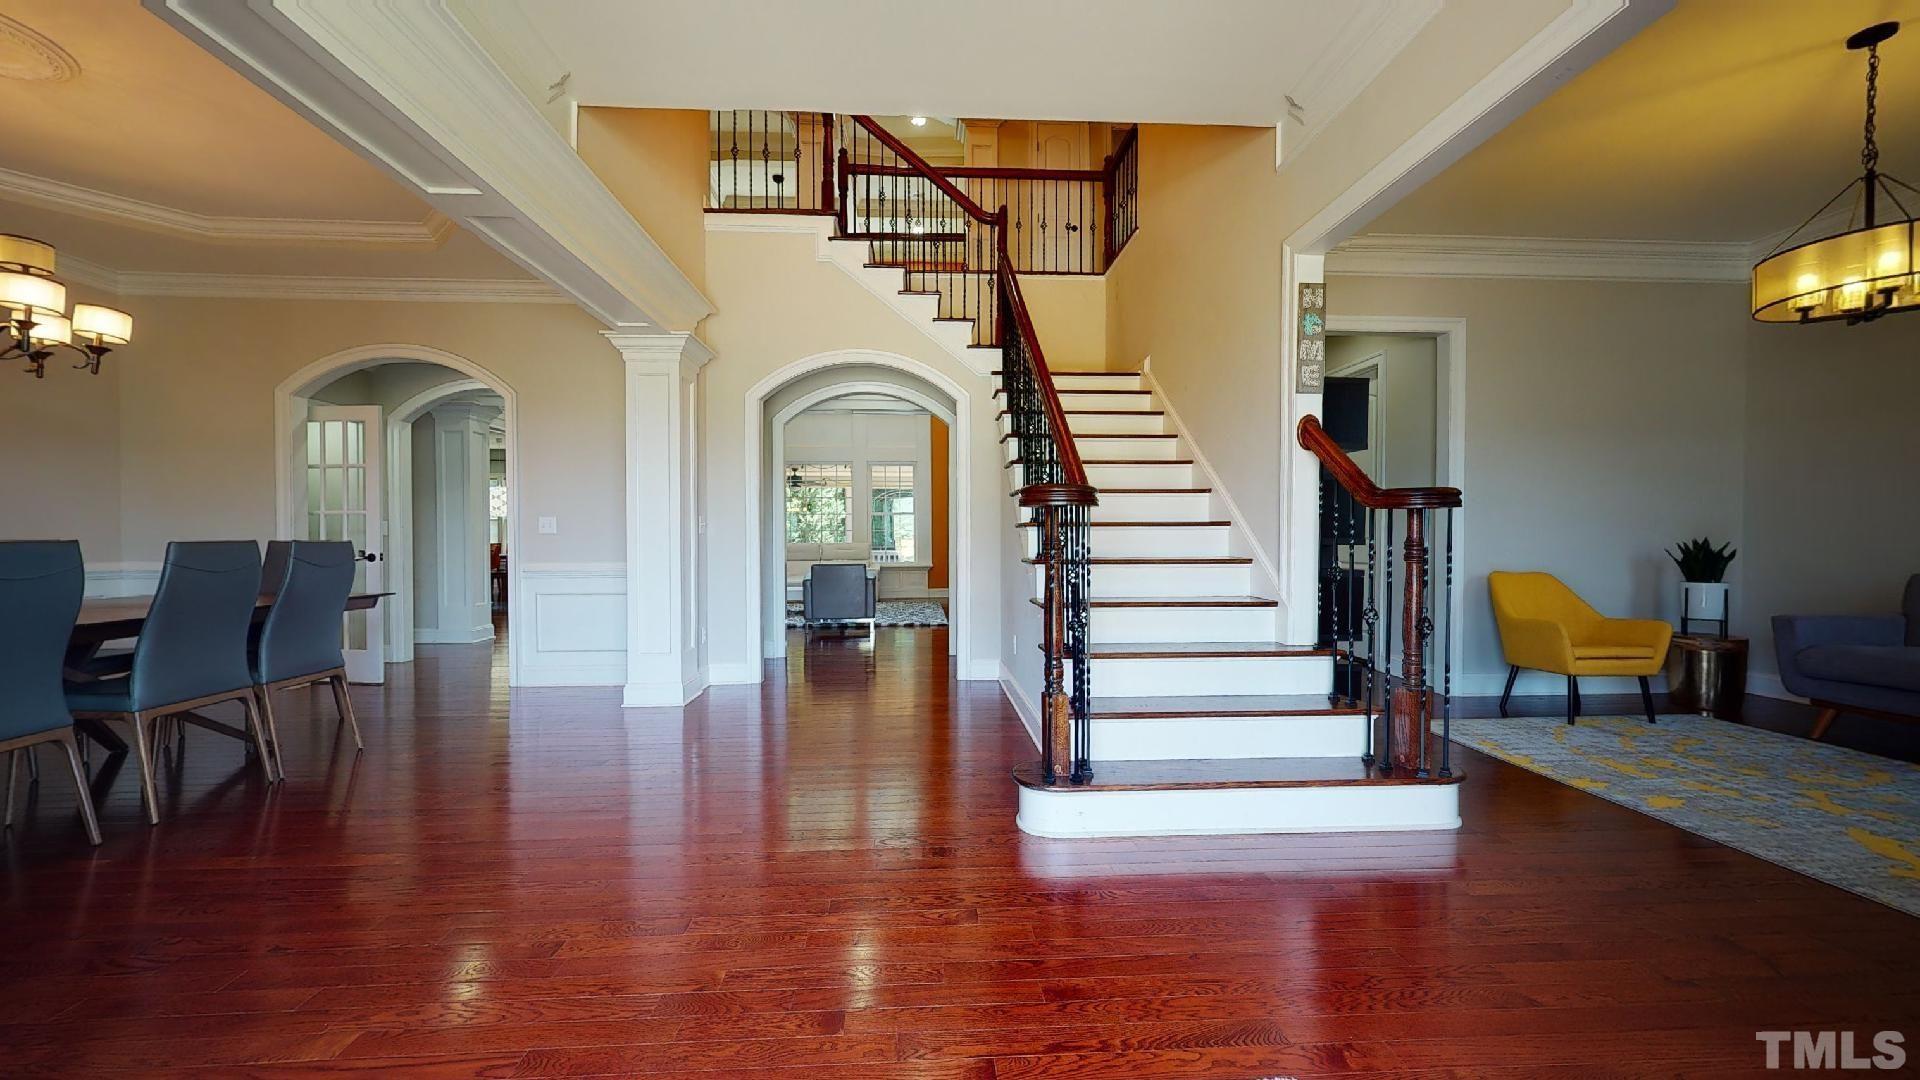 A welcoming and expansive elegant foyer